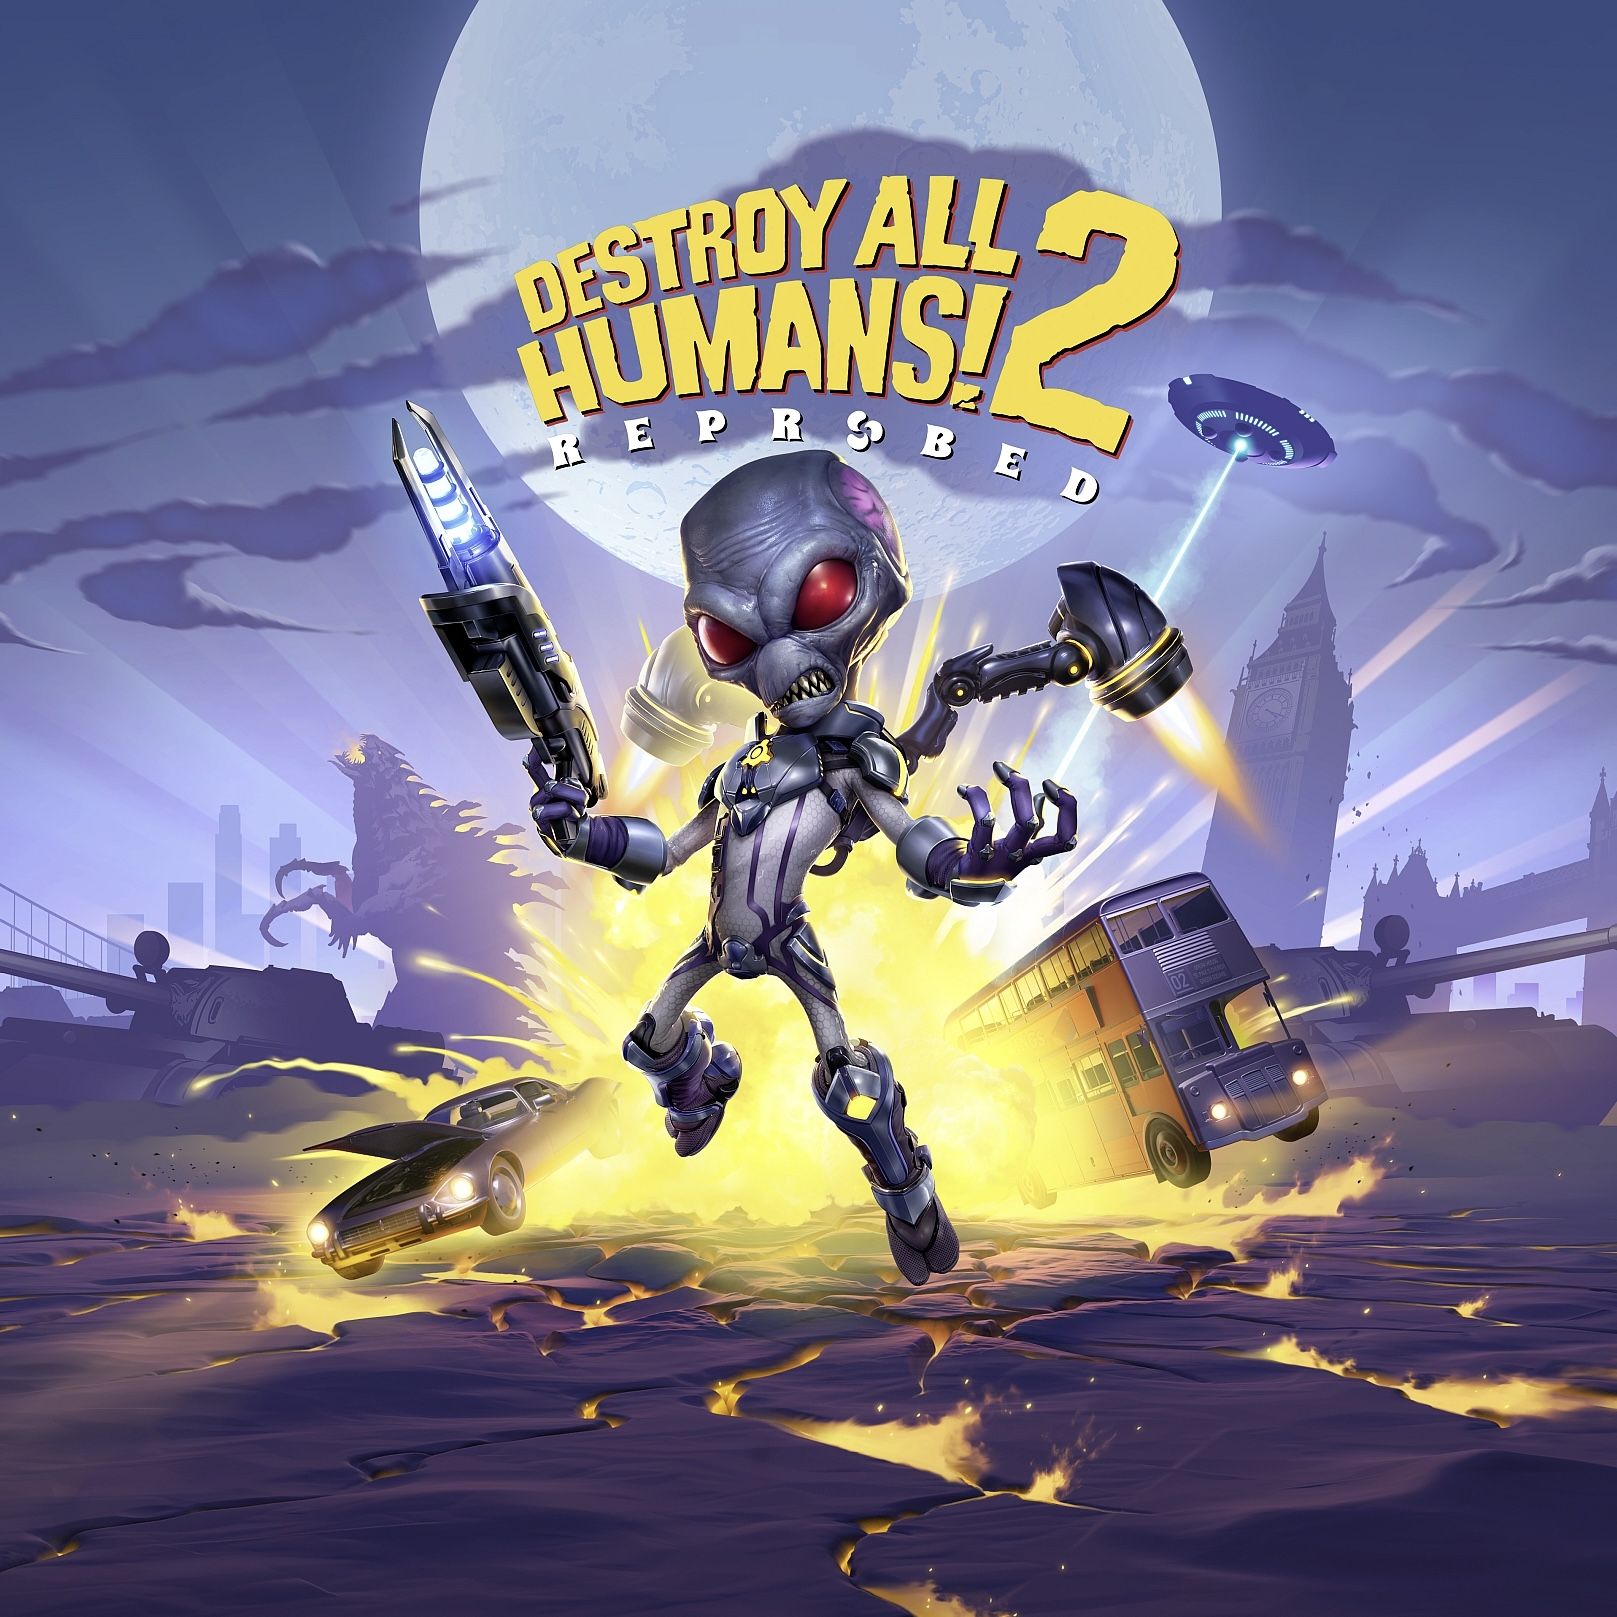 Destroy all Humans 2 reprobed. Destroy all Humans! 2 - Reprobed (ps5). Игры на ПС. Destroy all Humans!.